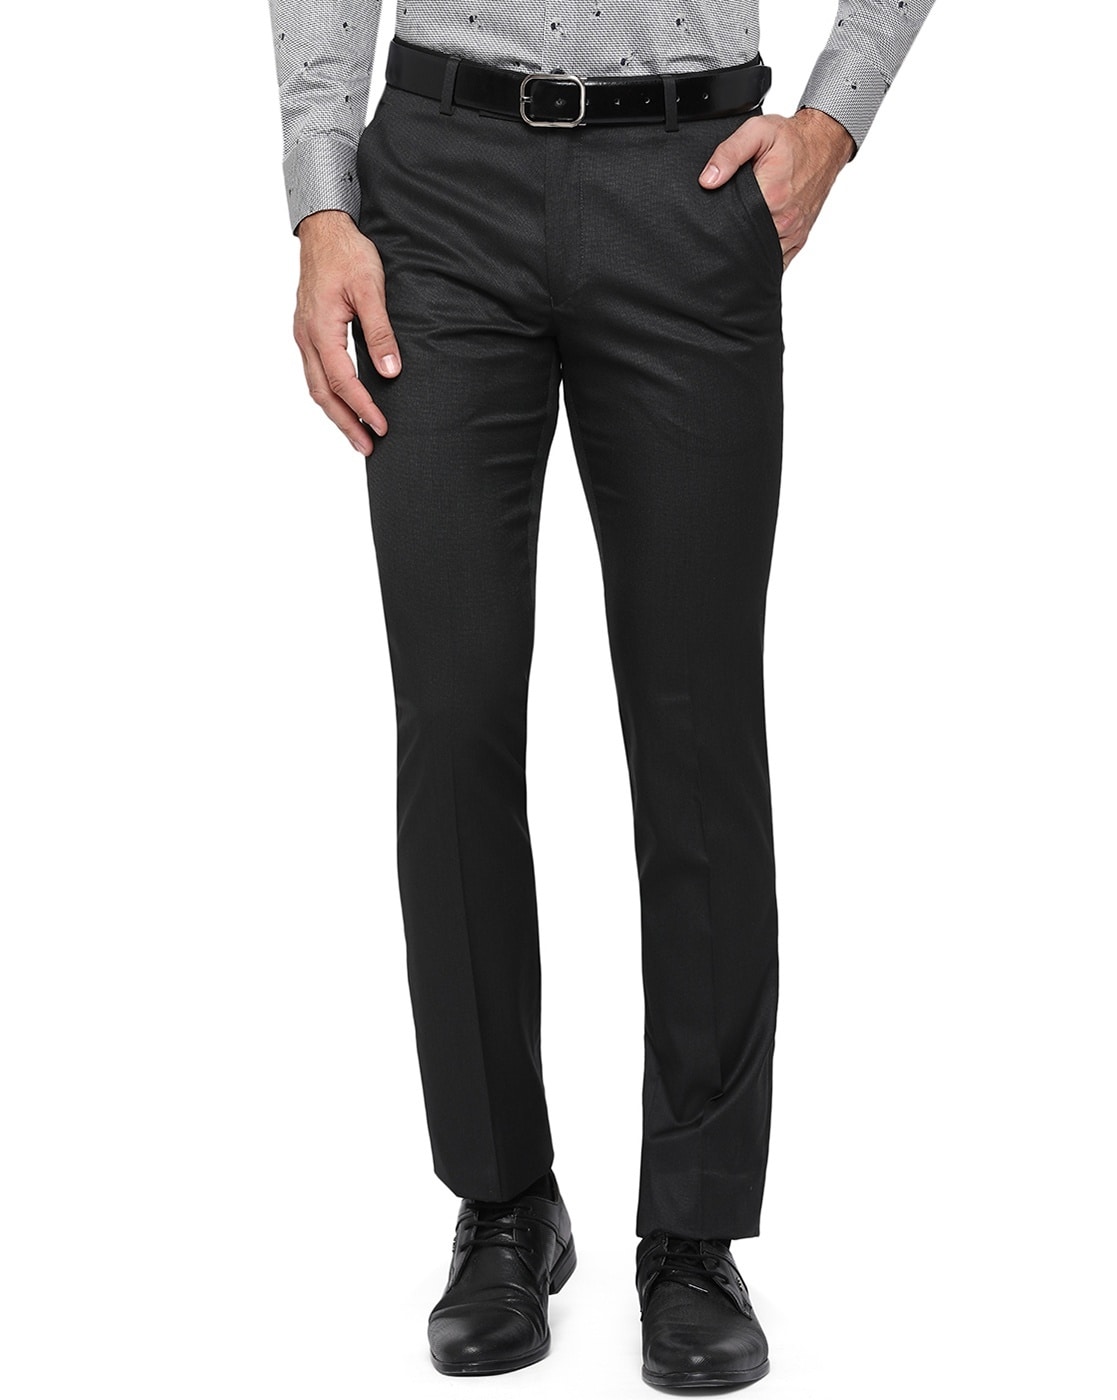 Mens Trouser Shopping  Buy Mens Trousers Online in the USA  G3 fashion